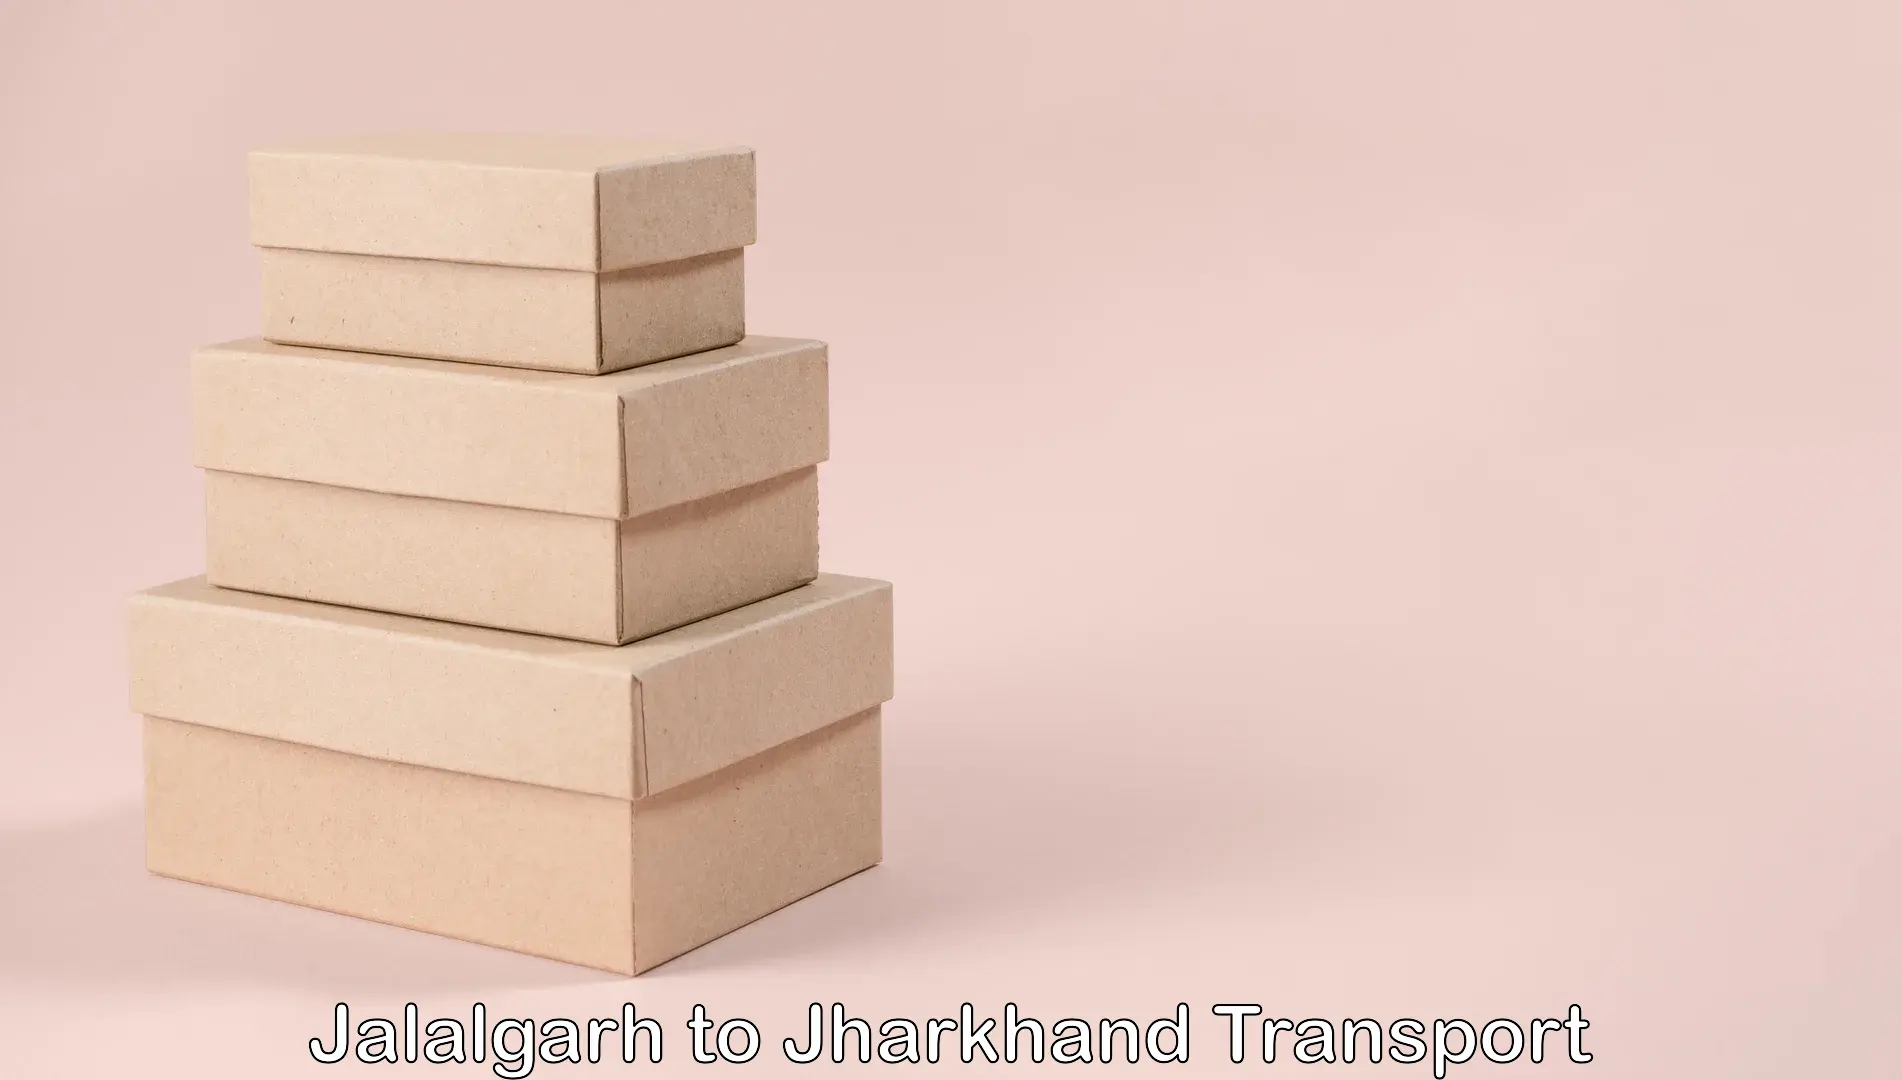 Container transport service Jalalgarh to Domchanch